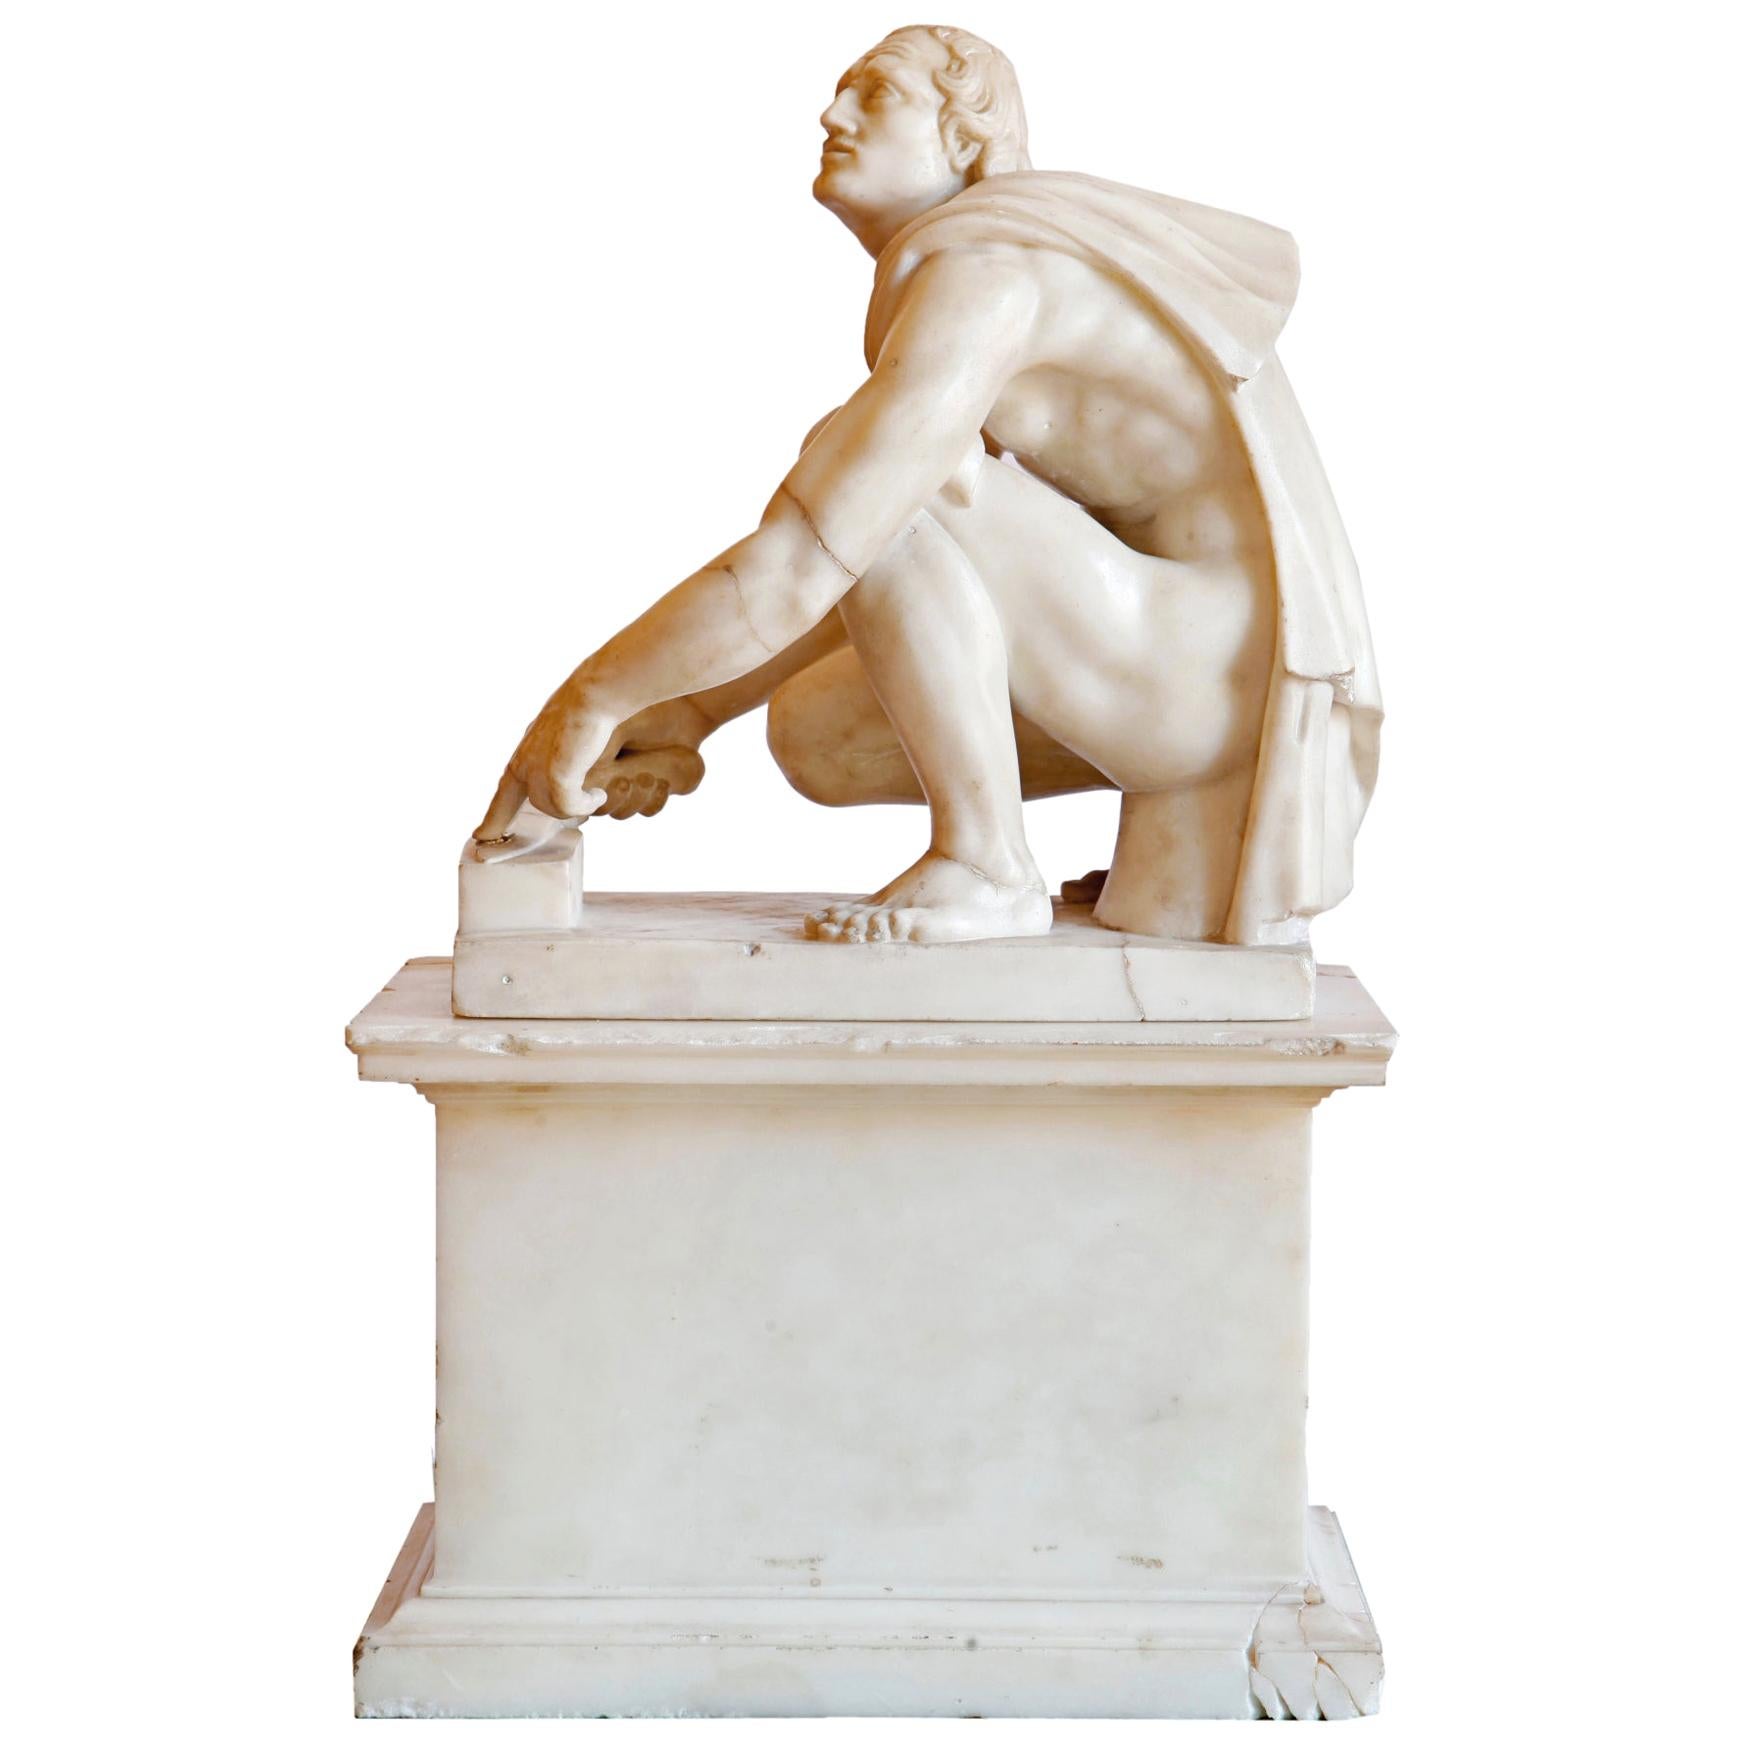 19th Century after the Antique White Marble Figure of the "Arrotino"